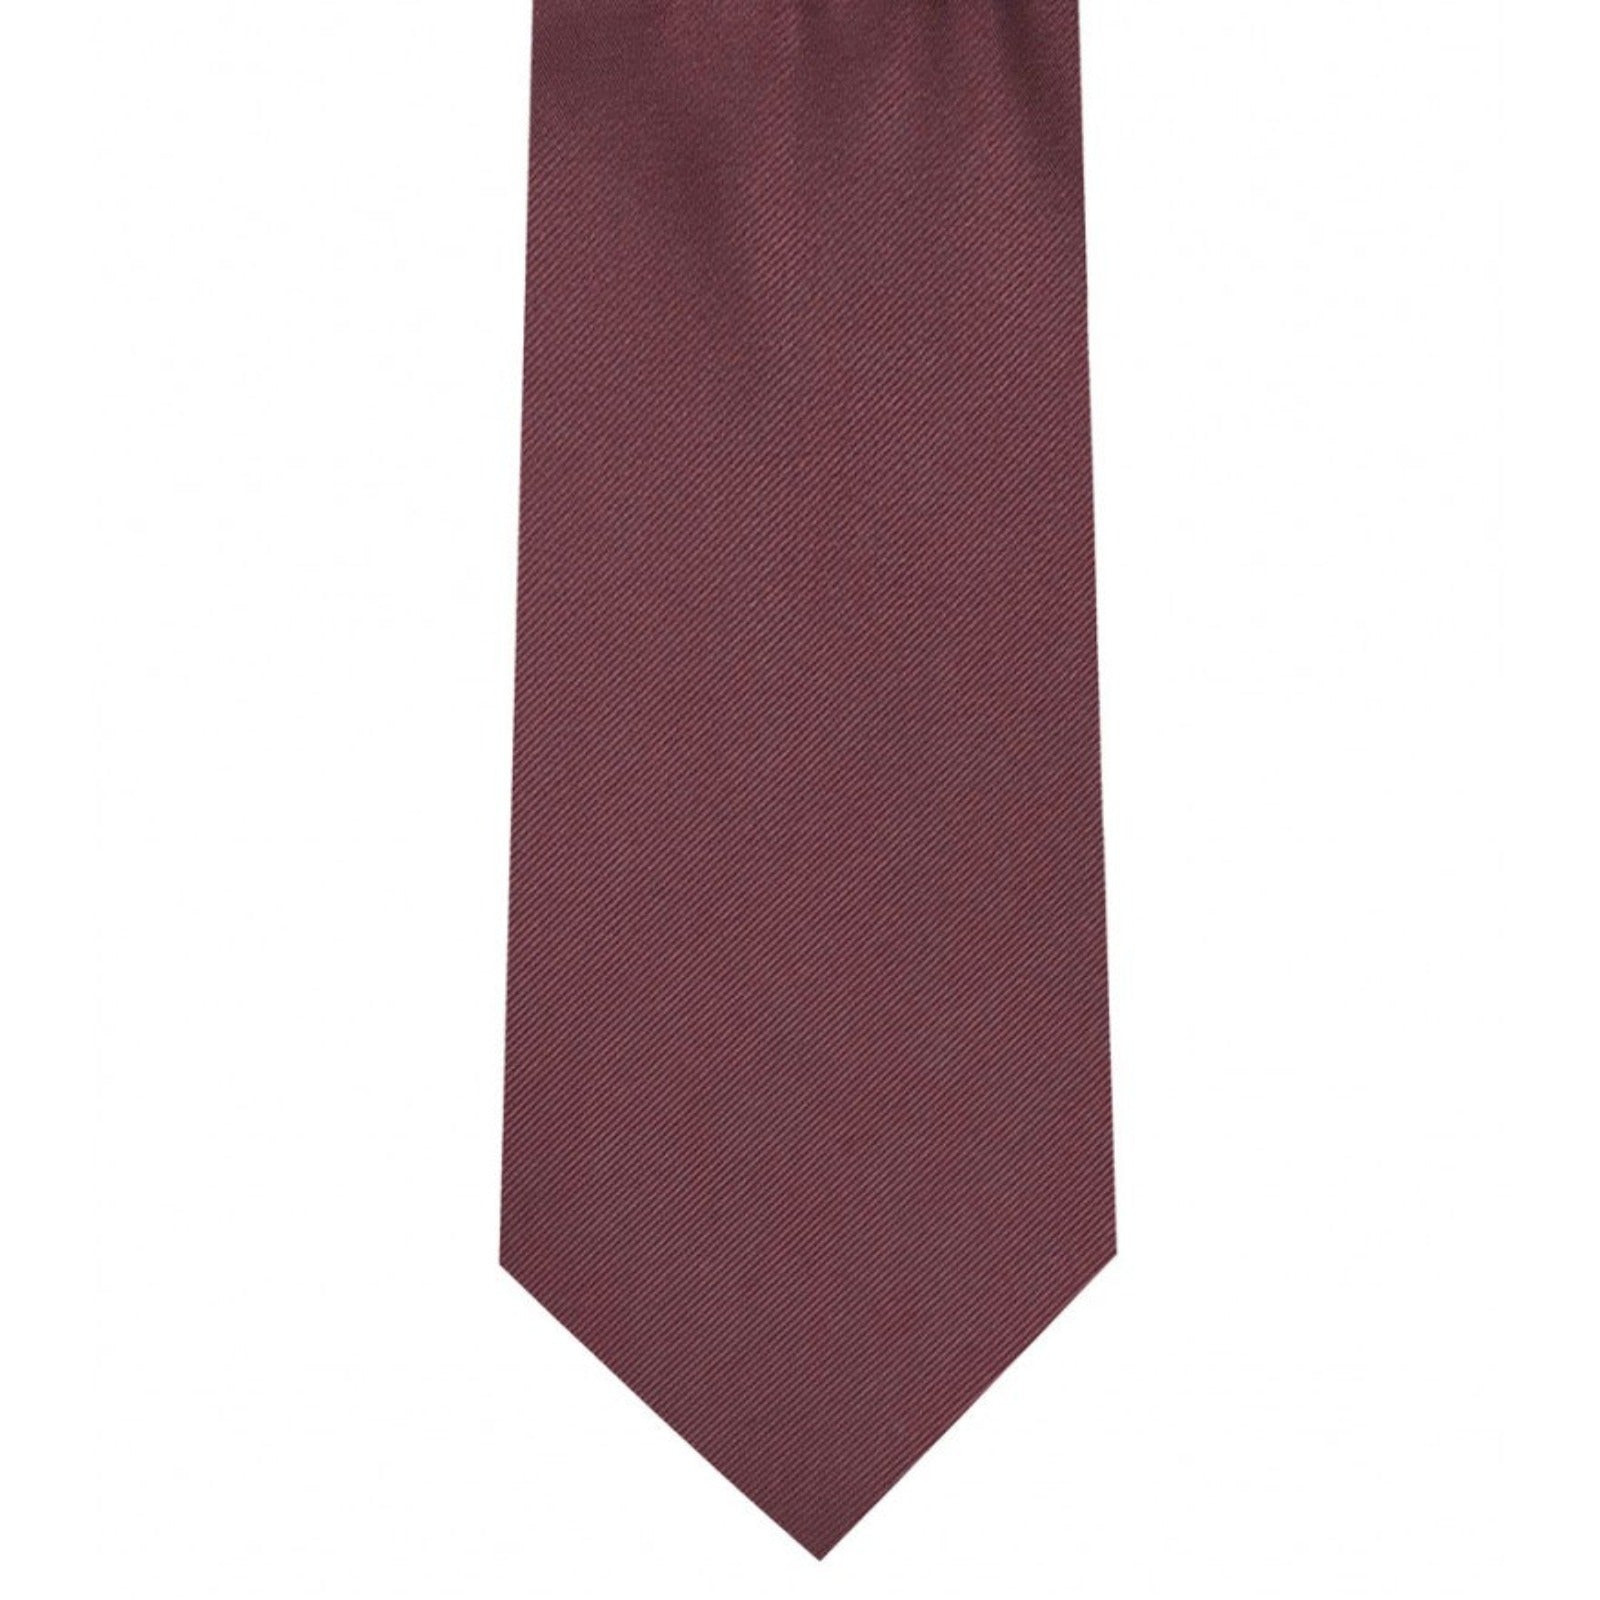 Classic Chianti Tie Ultra Skinny tie width 2.25 inches With Matching Pocket Square | KCT Menswear